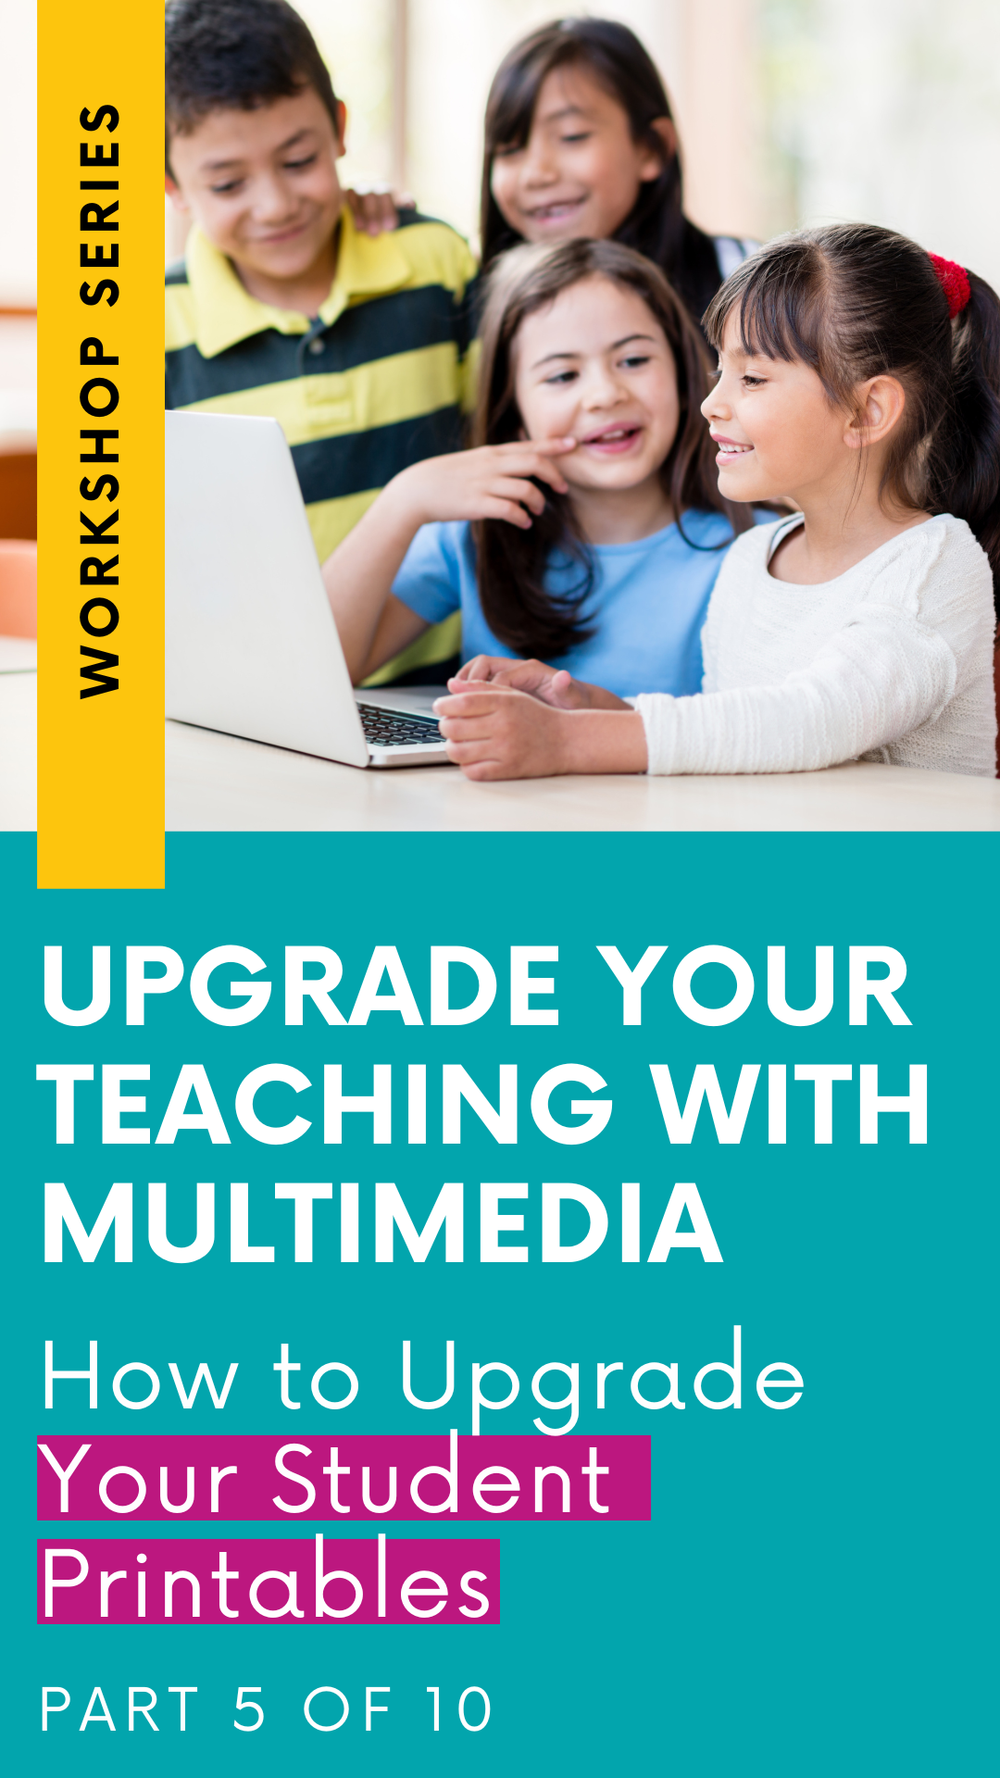 Upgrade Your Student Printables! (From the Upgrade Your Teaching with Multimedia Workshop Series: Part 5) (Copy)